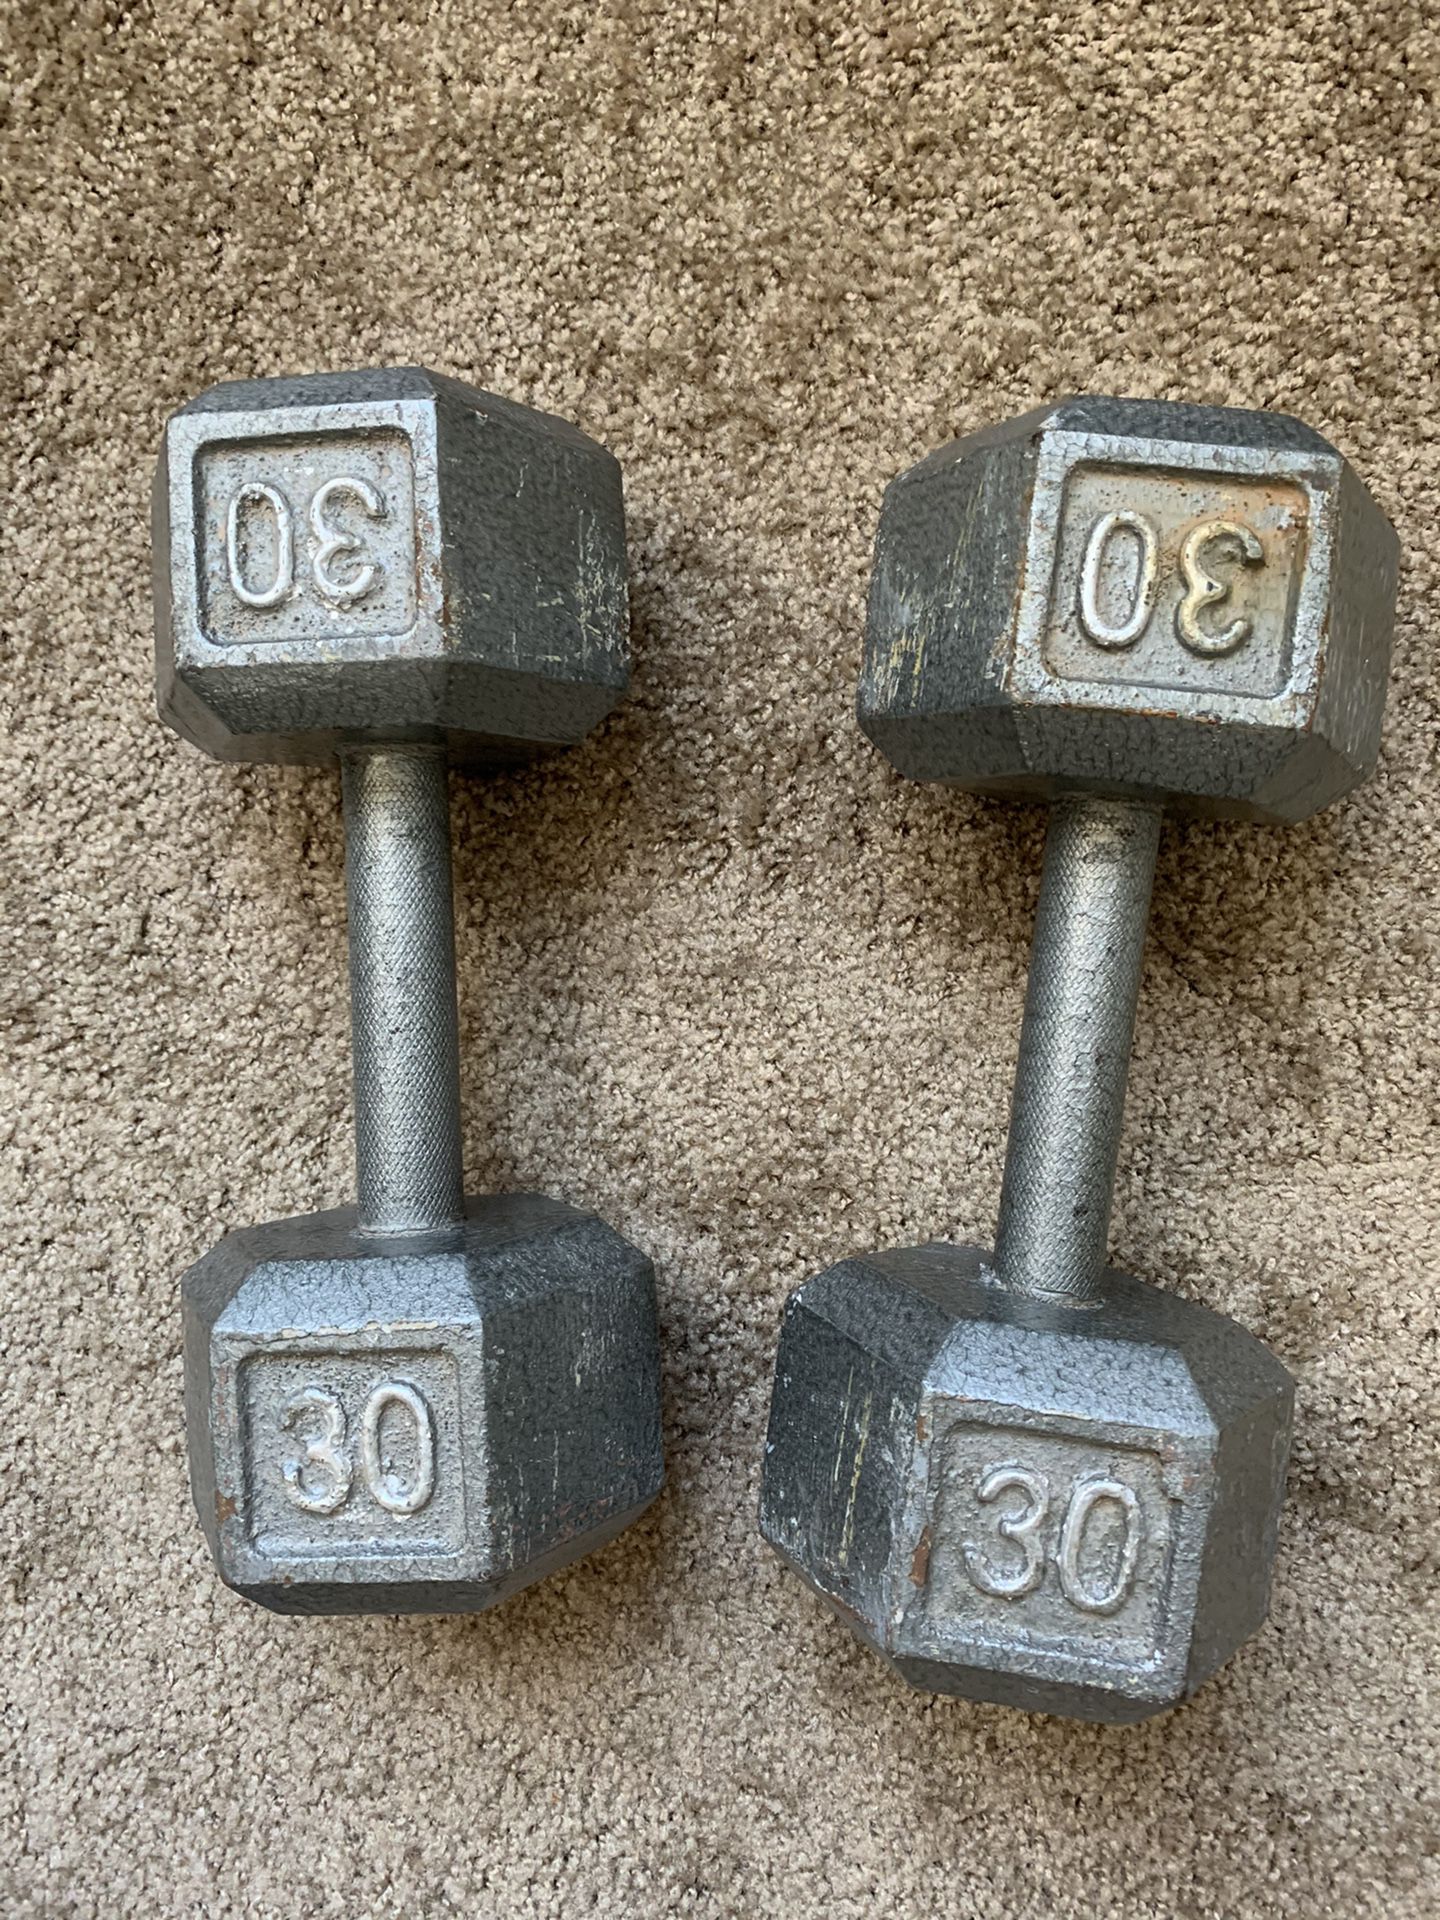 Pair of 30 lb DumbBells (Please no lowball offers)